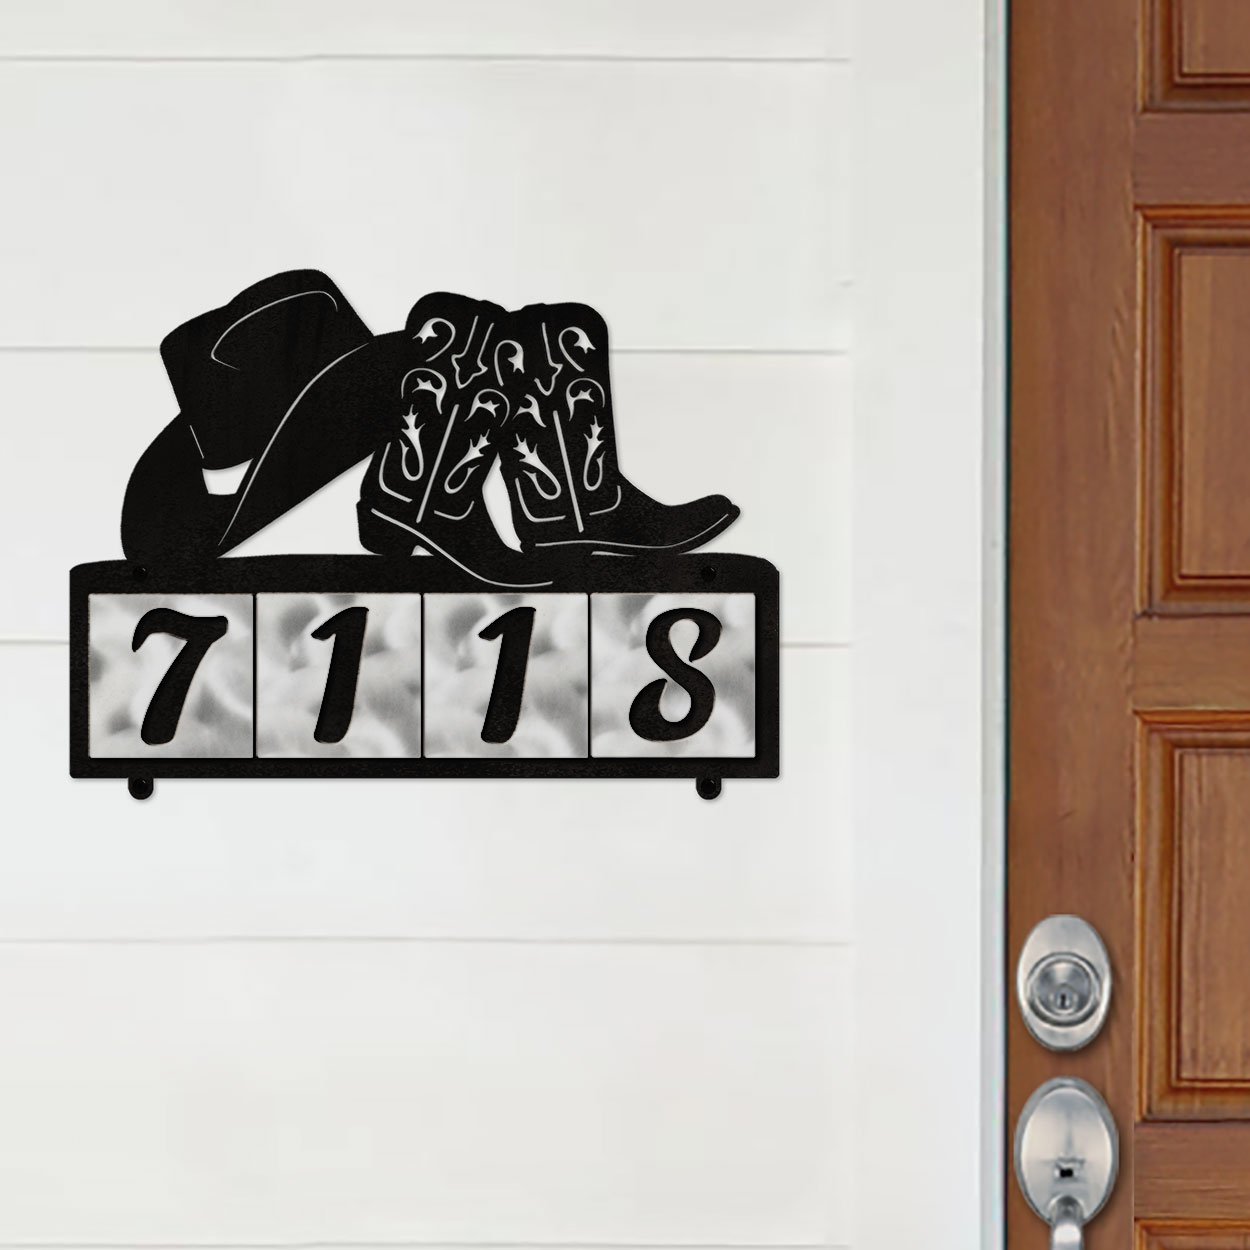 609034 - XL Cowboy Hat and Boots Design 4-Digit Horizontal 6in Tile Outdoor House Numbers